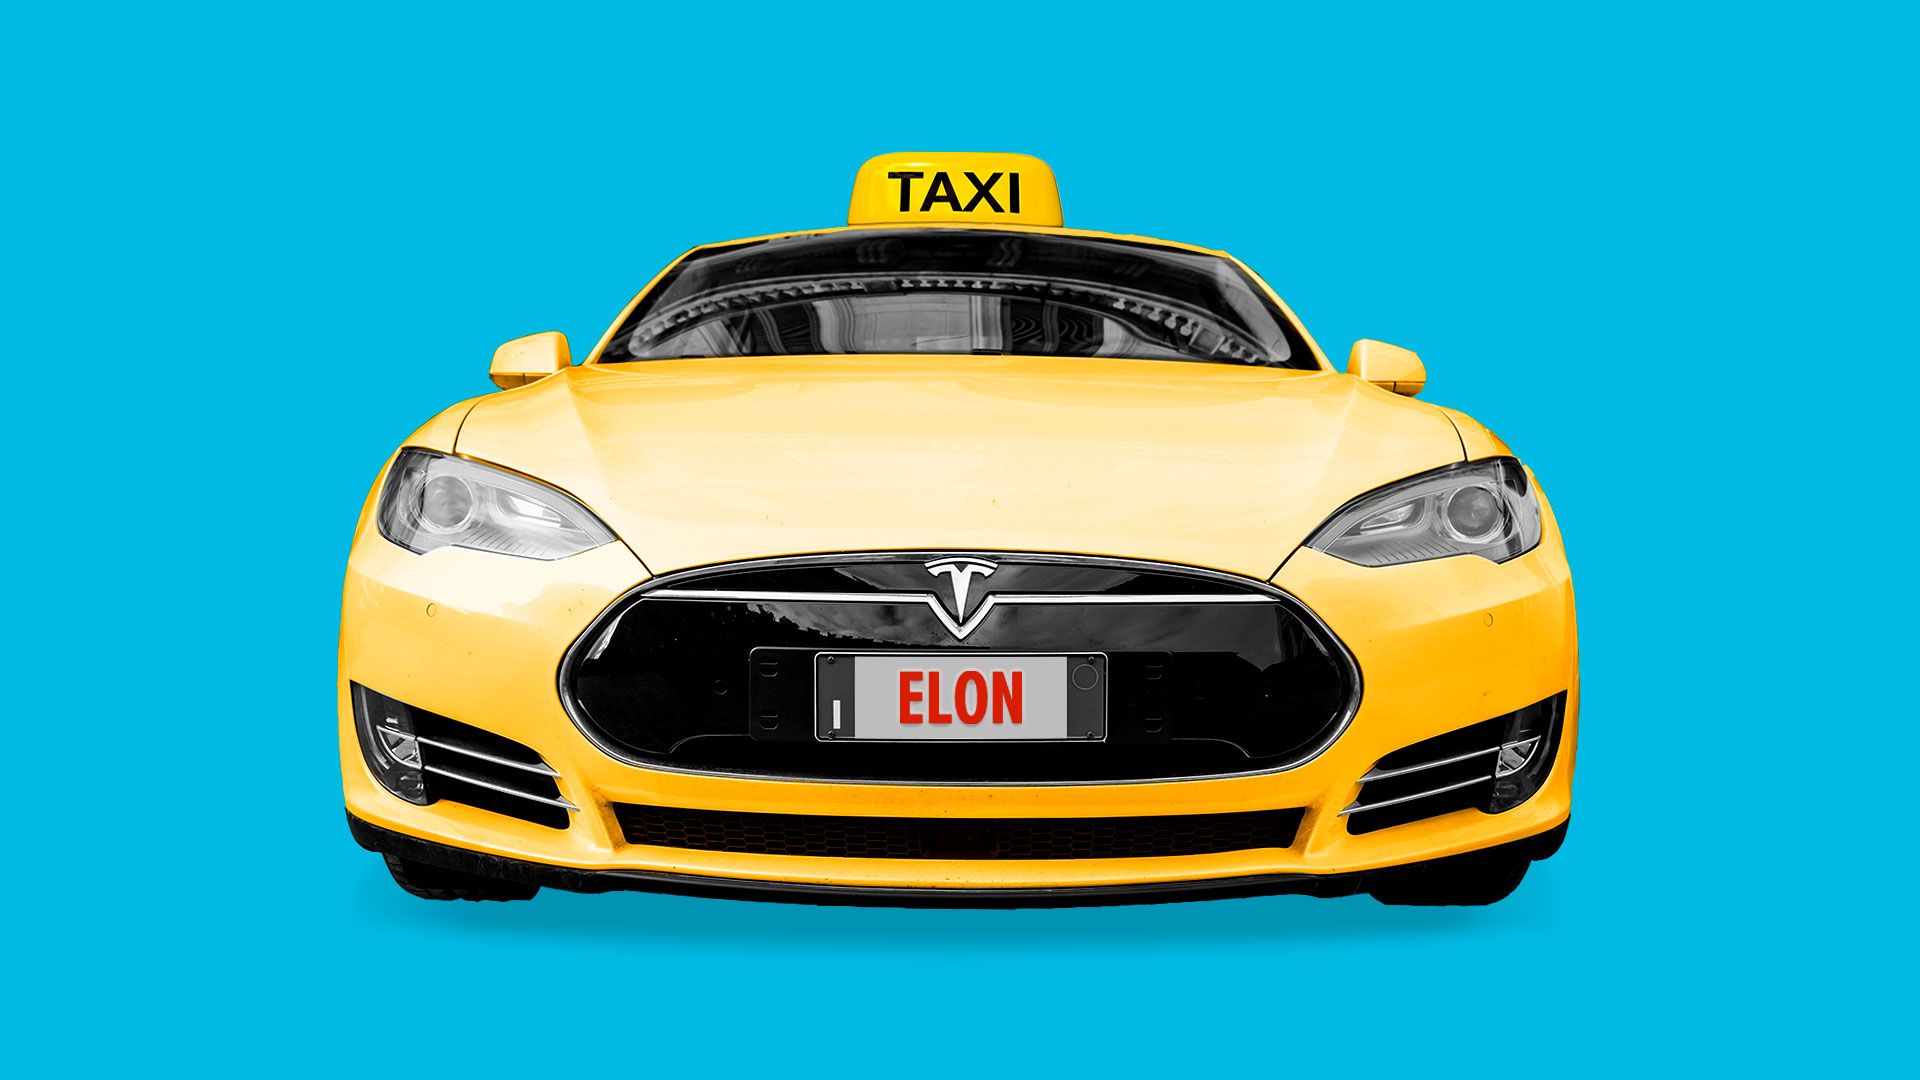 Illustration of a yellow Tesla car with a Taxi sign on top.